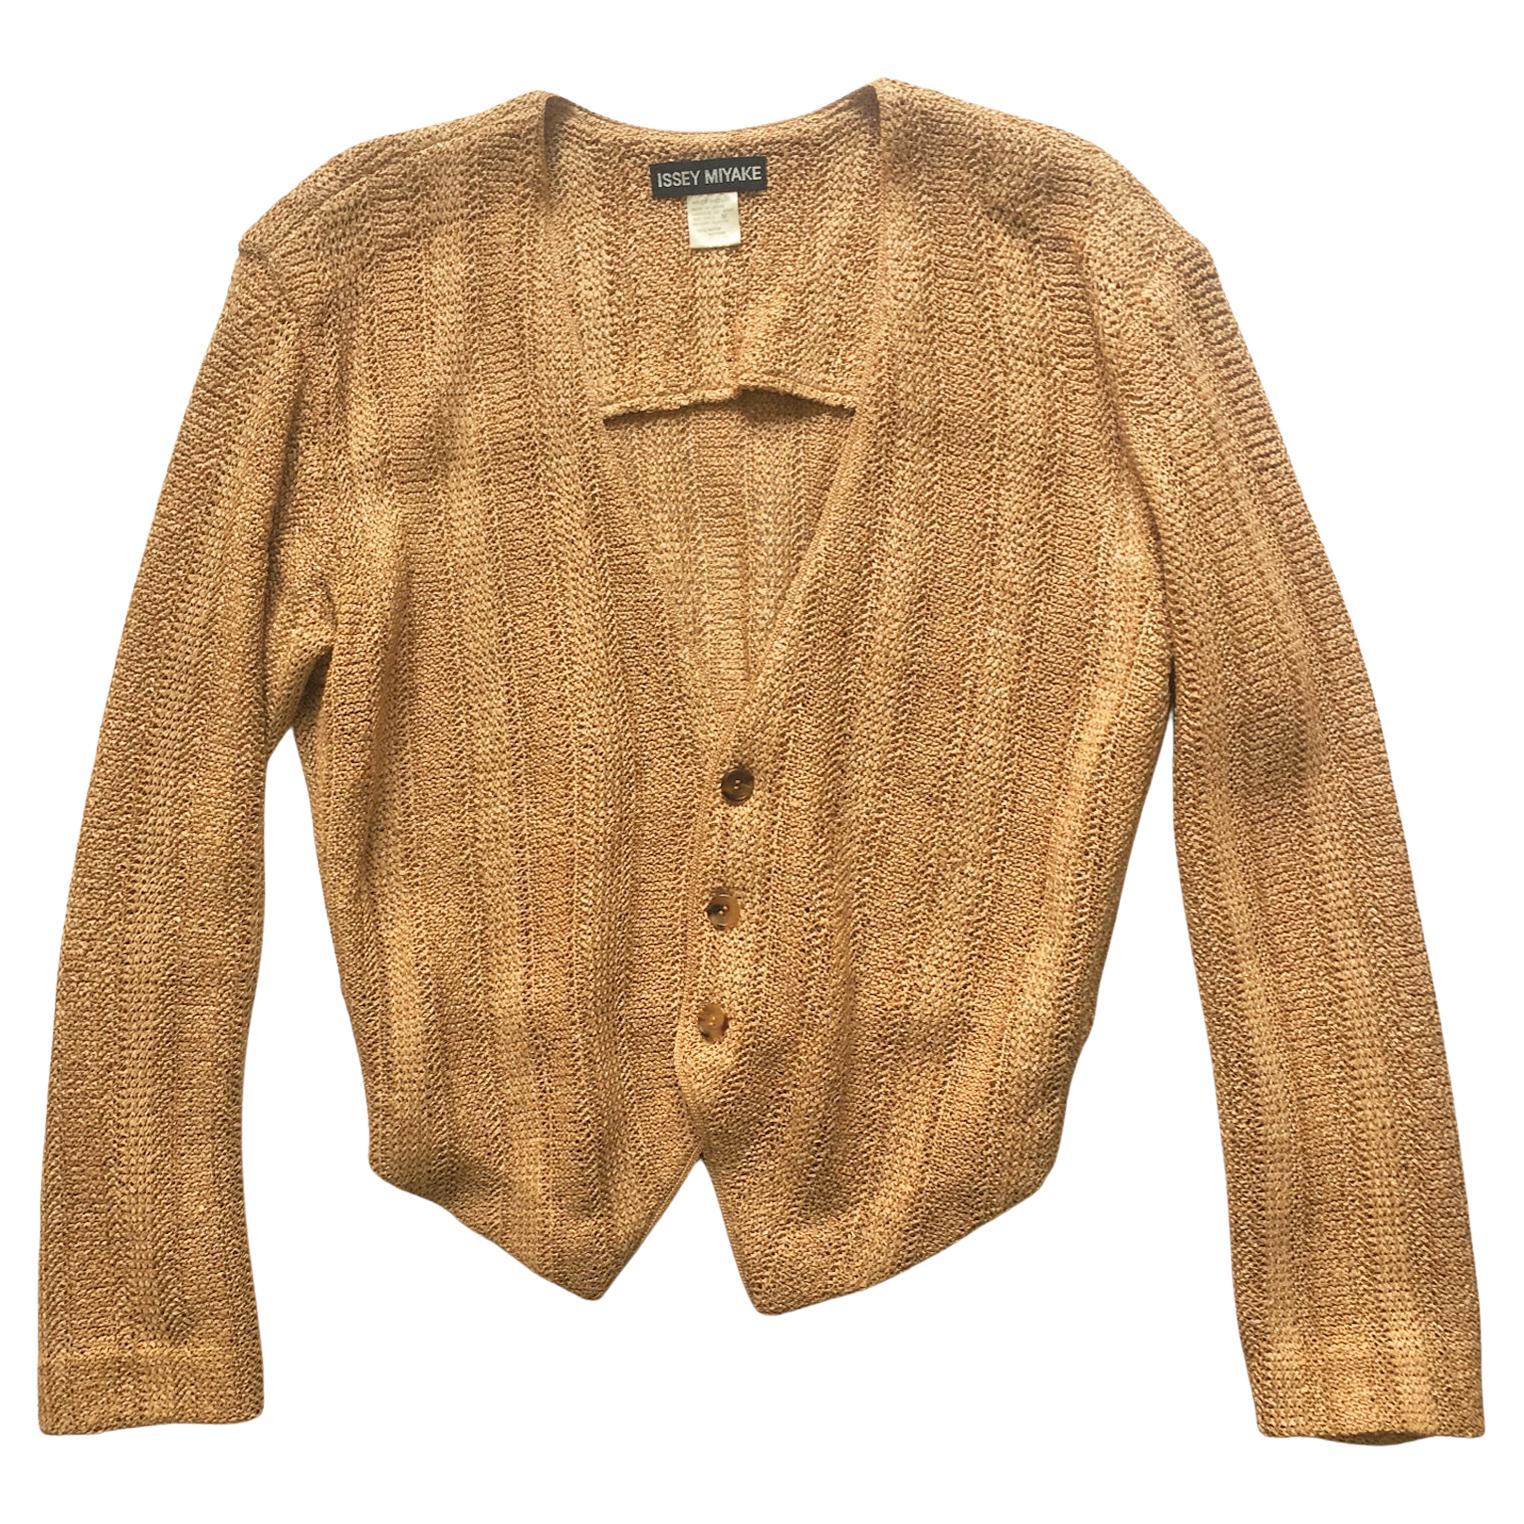 Issey Miyake Tan Straw Knit Beige Cardigan early 90s For Sale